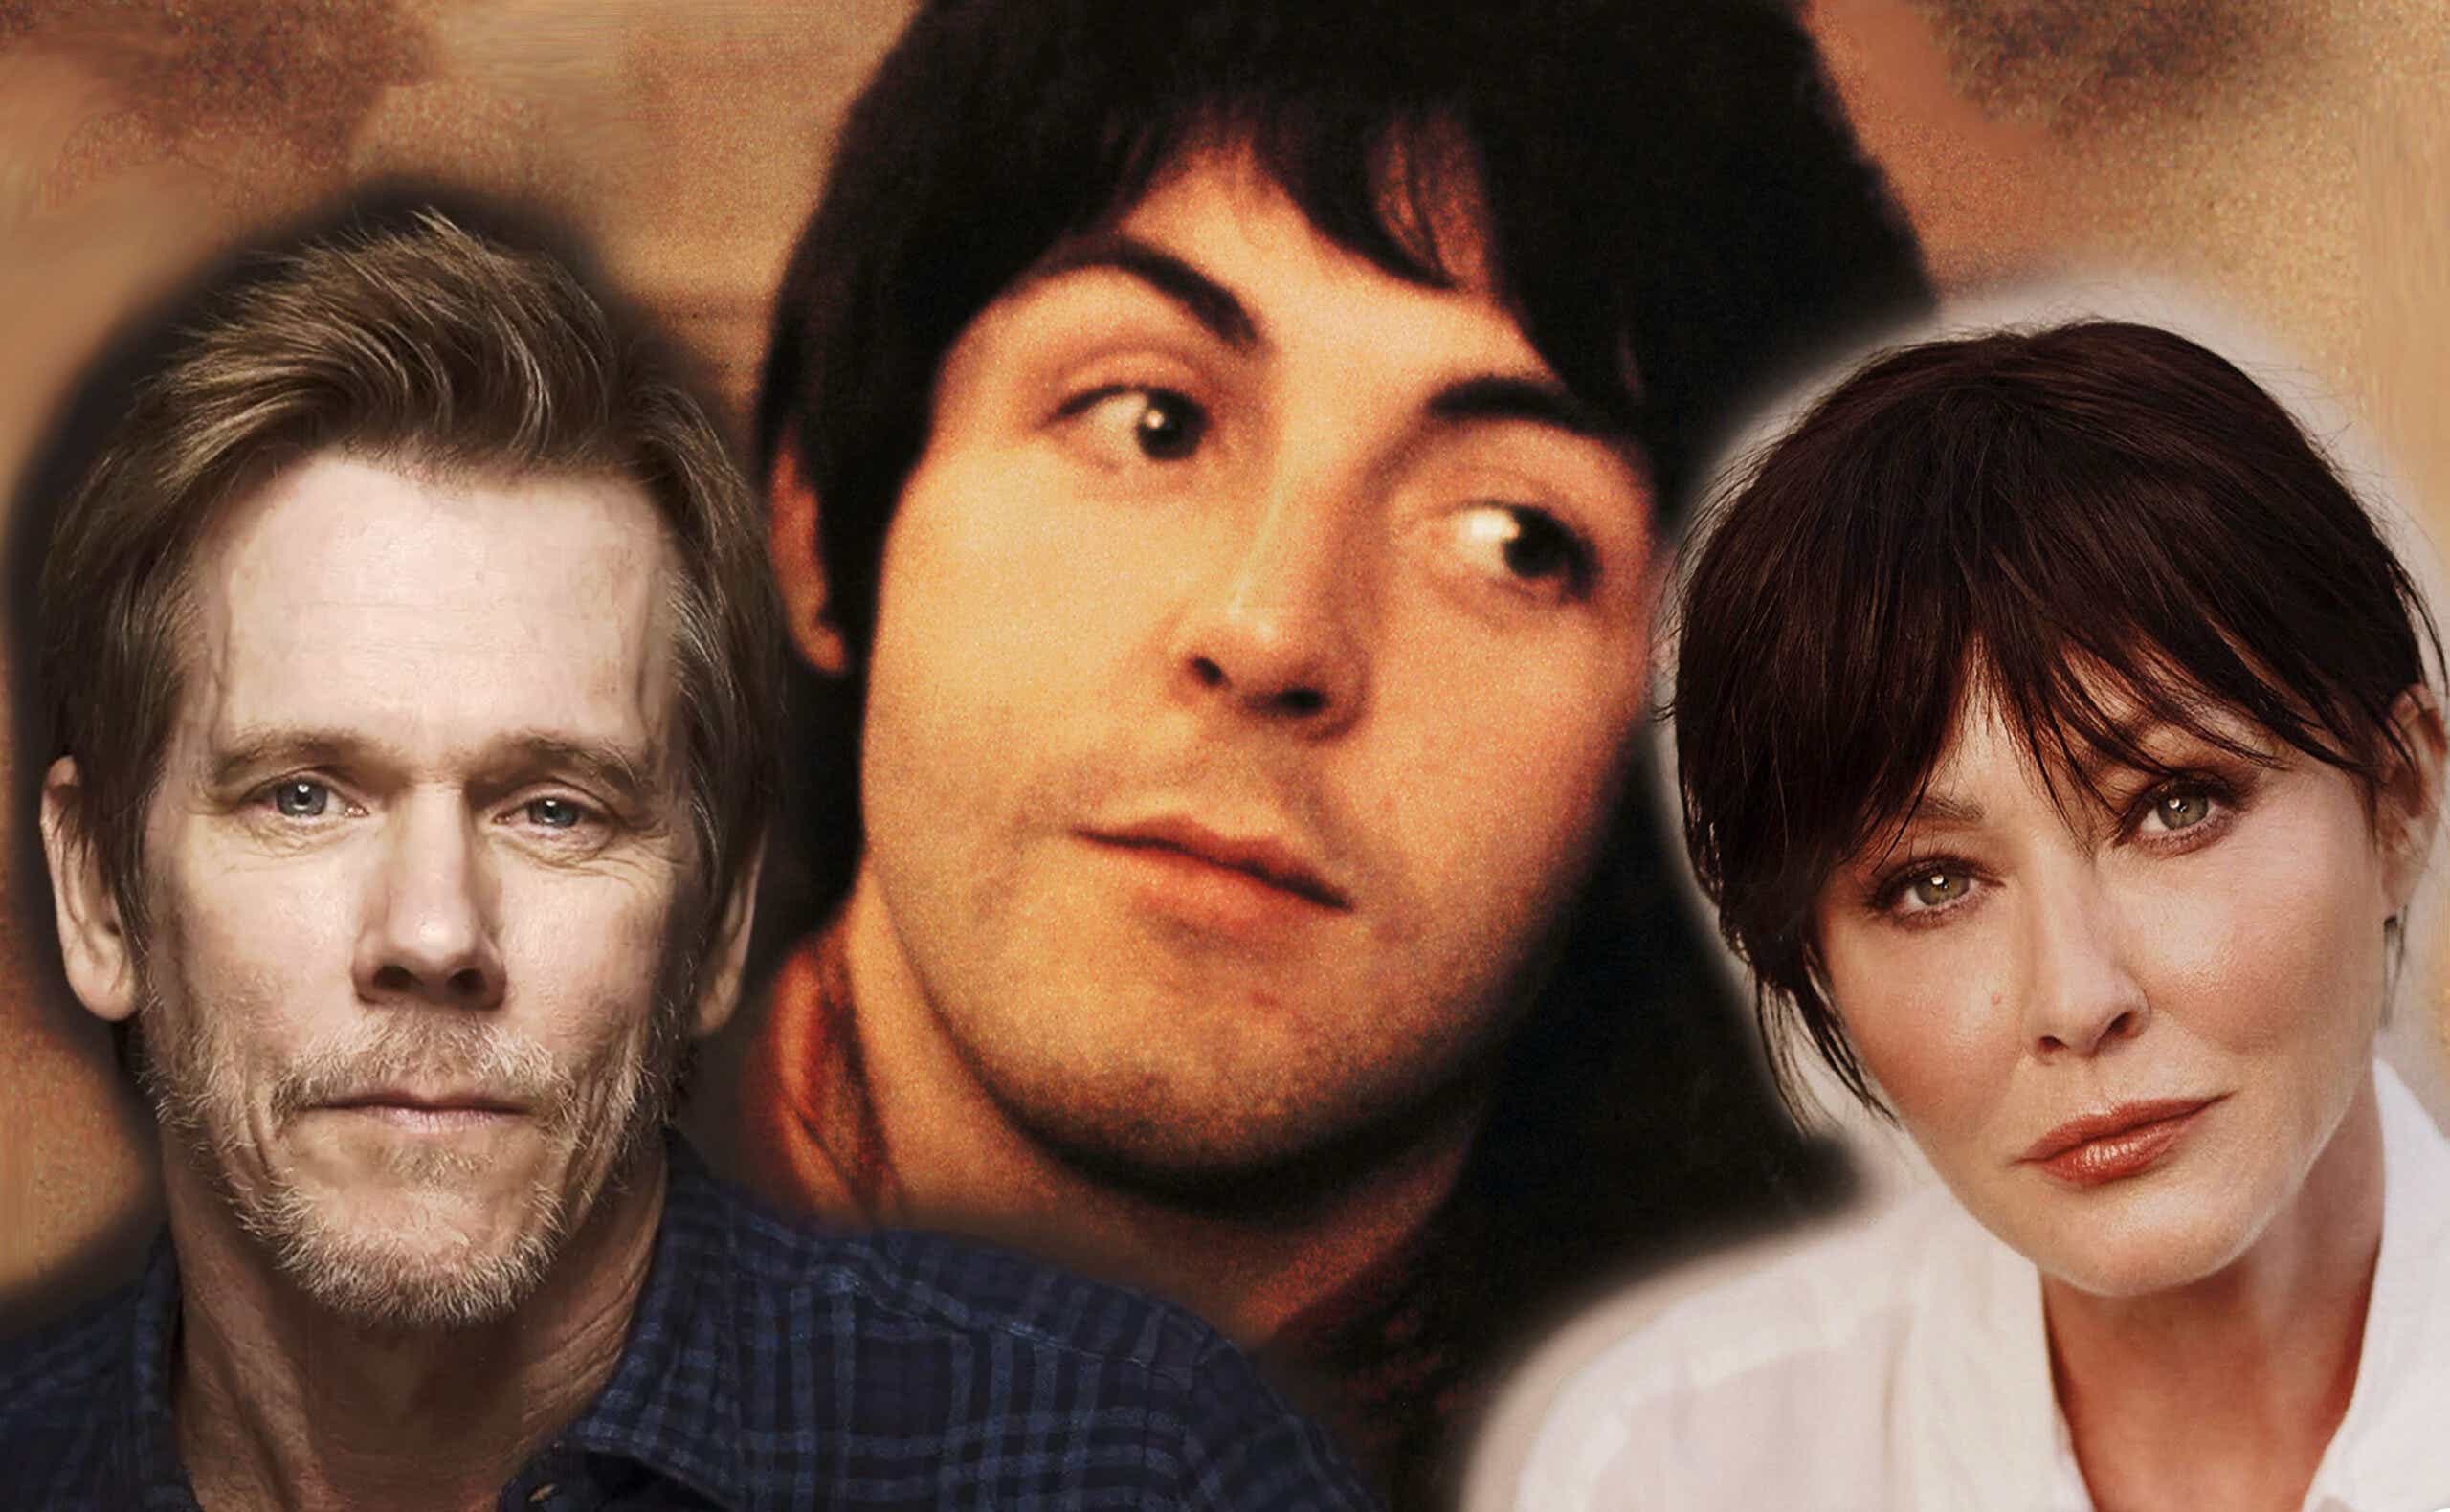 Image of Kevin Bacon, Paul McCartney, and Shannen Doherty